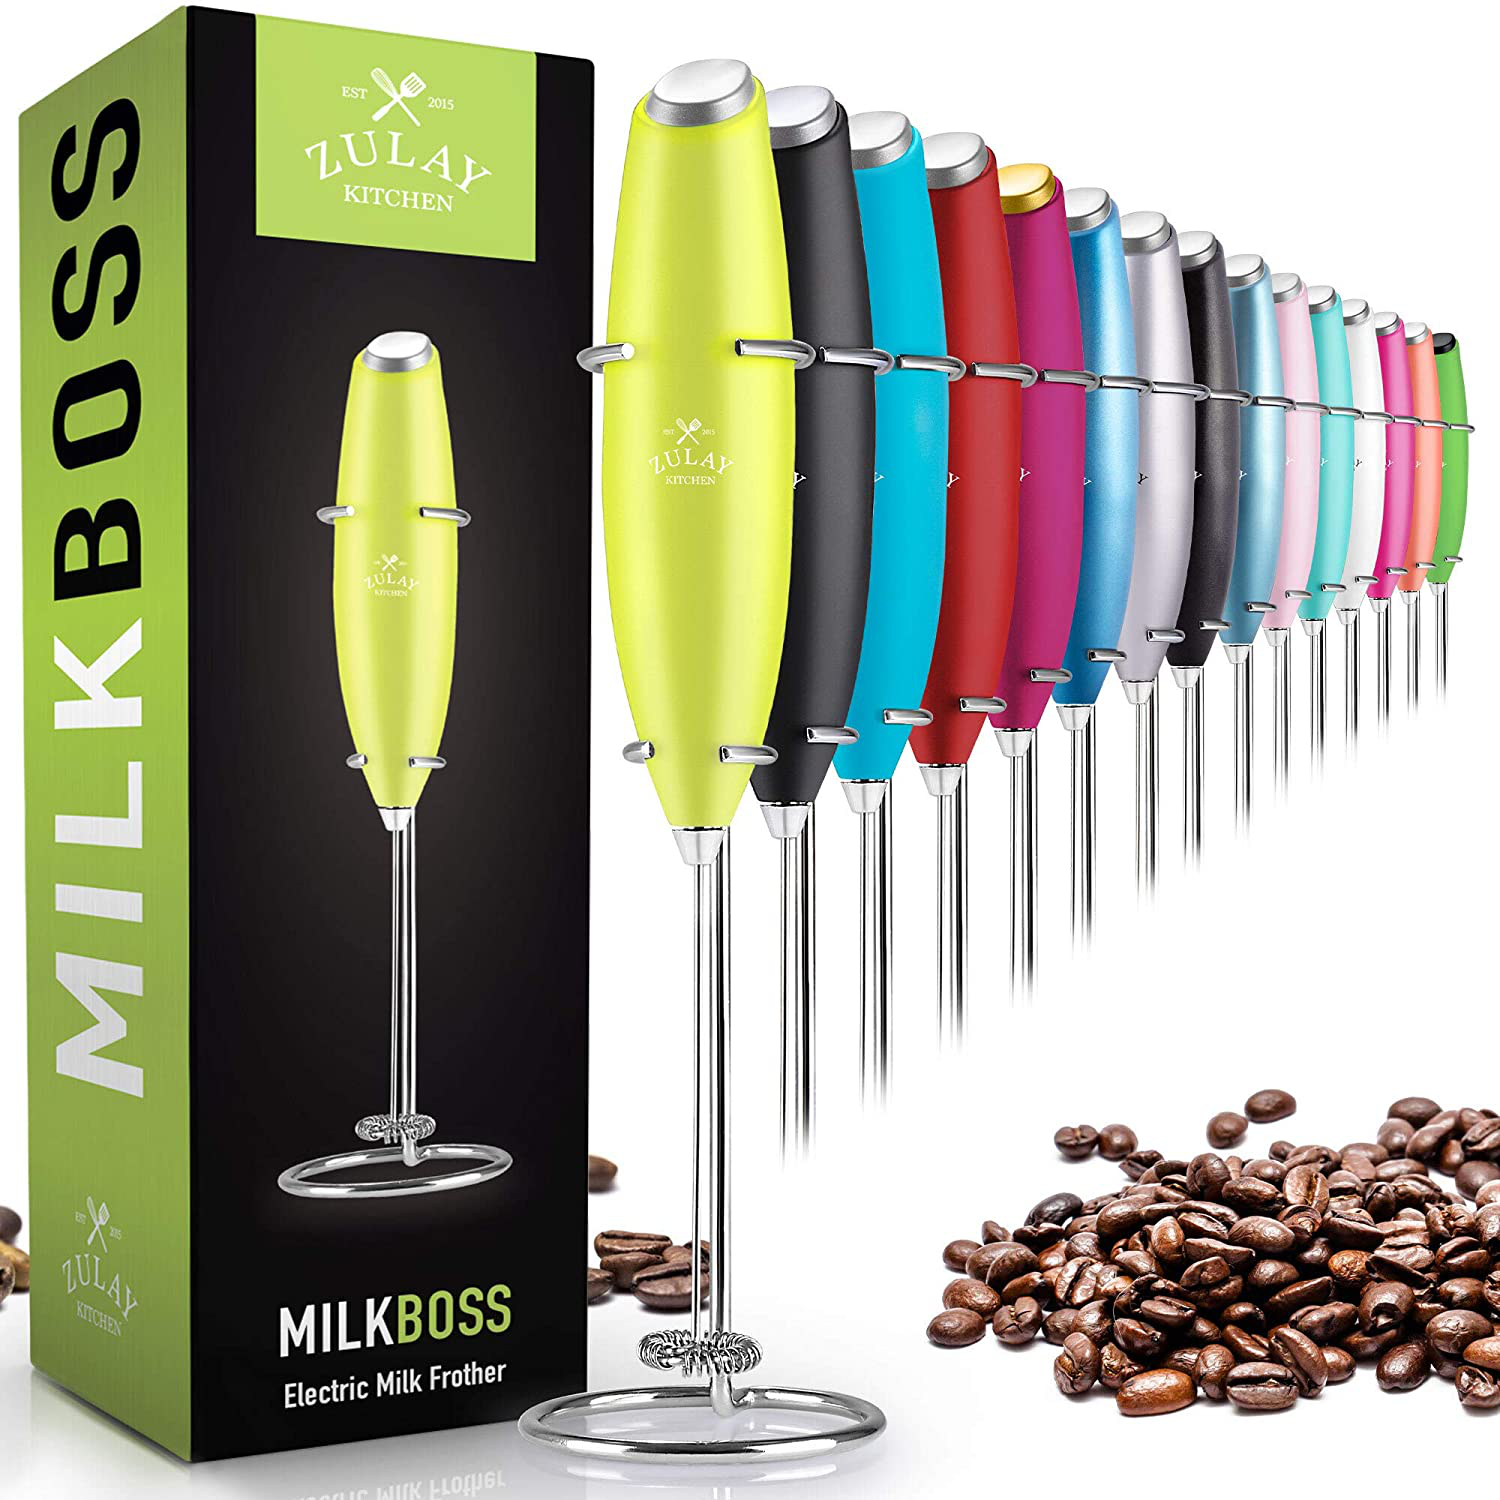 Zulay Original Milk Frother Handheld Foam Maker for Lattes - Whisk Drink Mixer for Coffee, Mini Foamer for Cappuccino, Frappe, Matcha, Hot Chocolate by Milk Boss